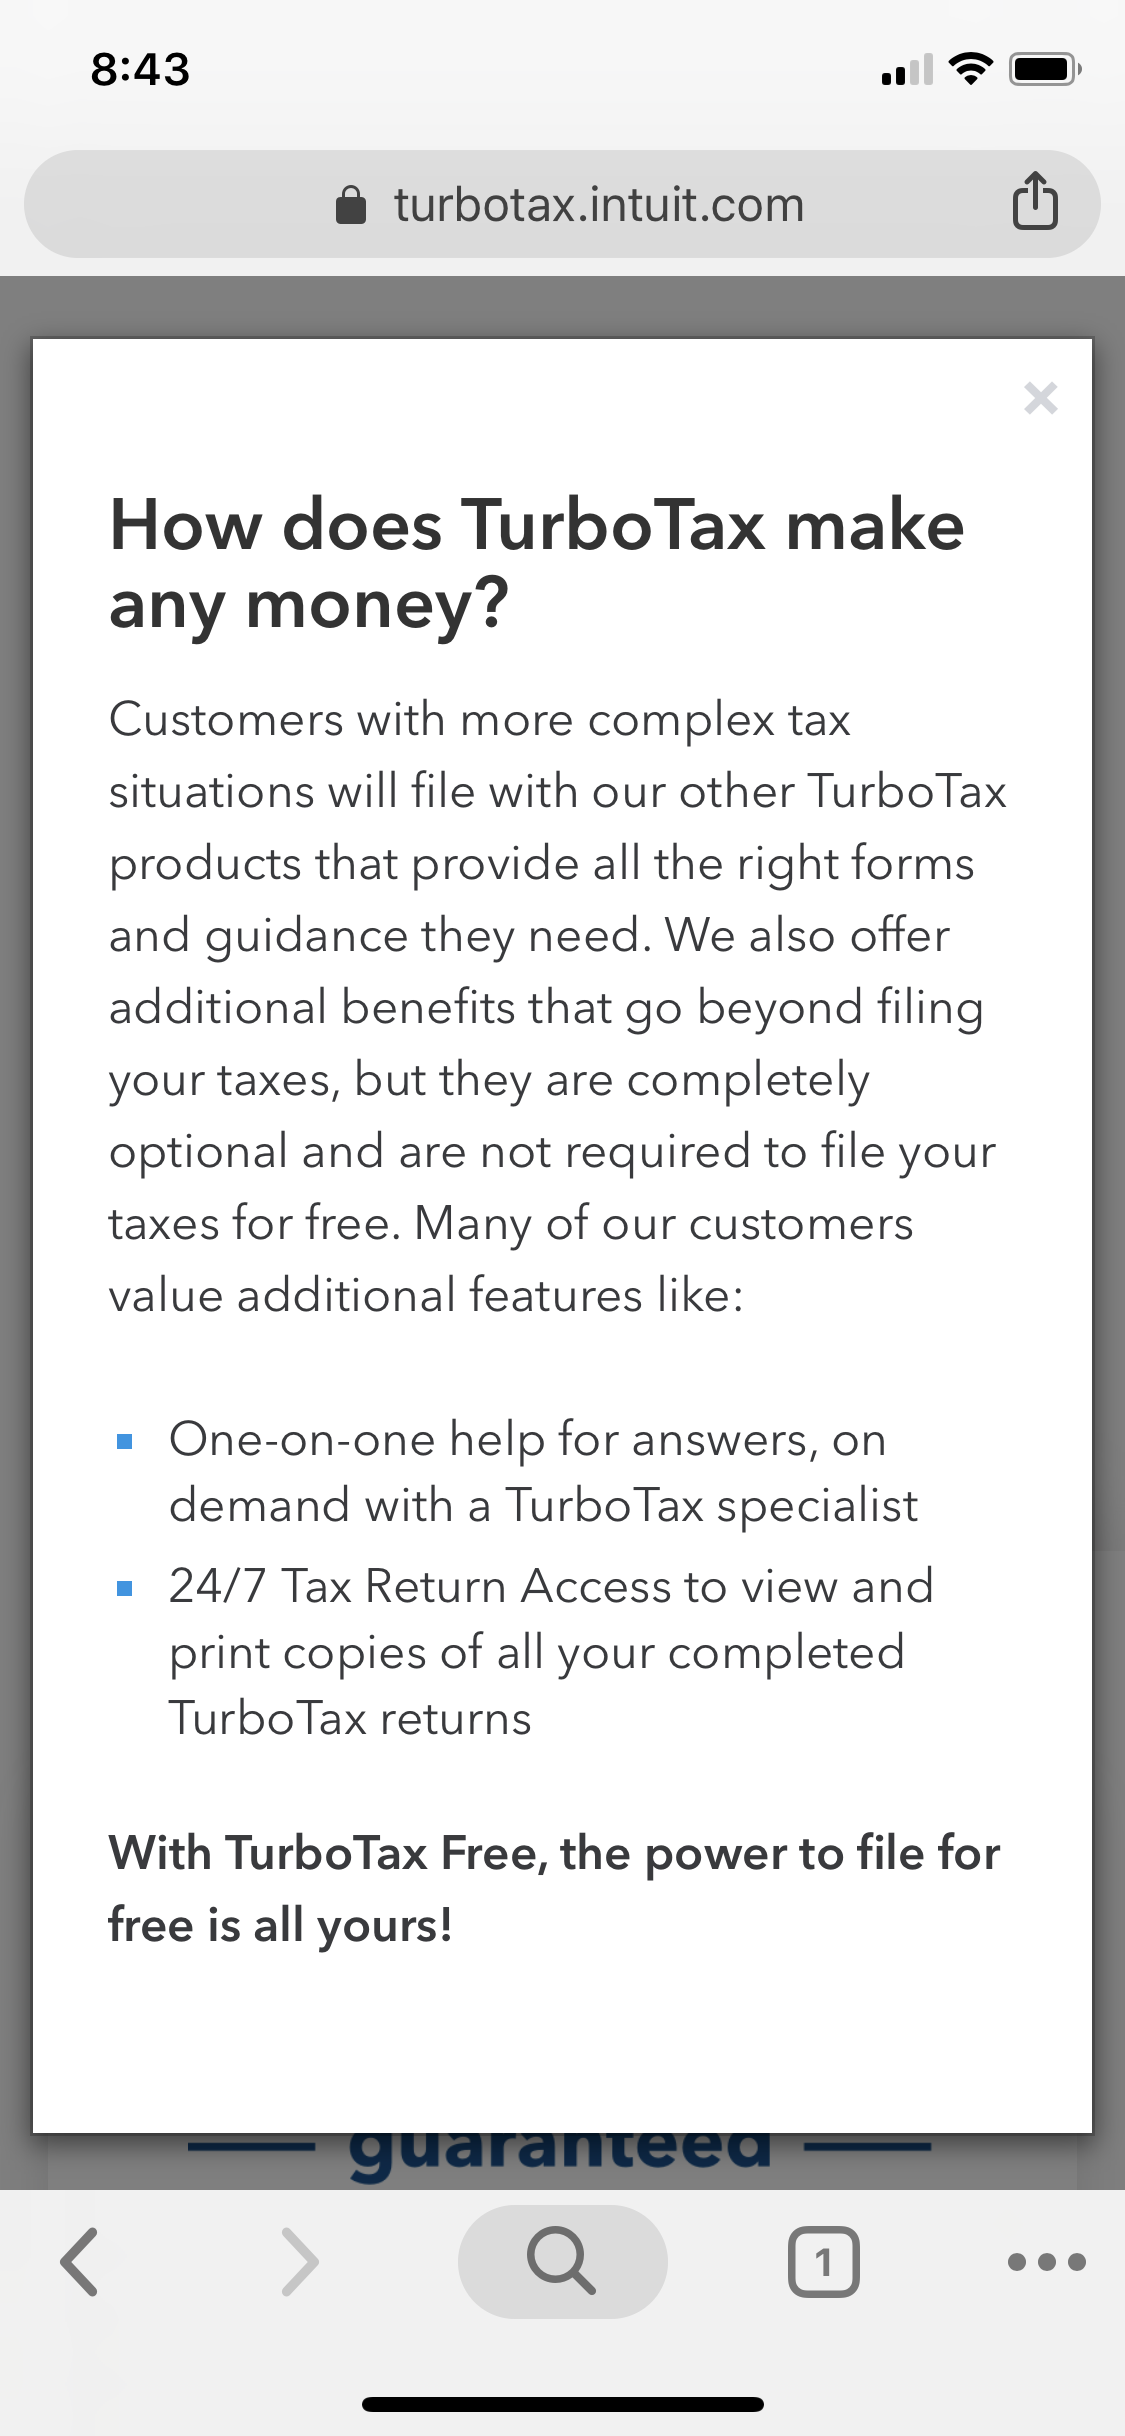 Explanation for my TurboTax Free is $0 (zero dollars).